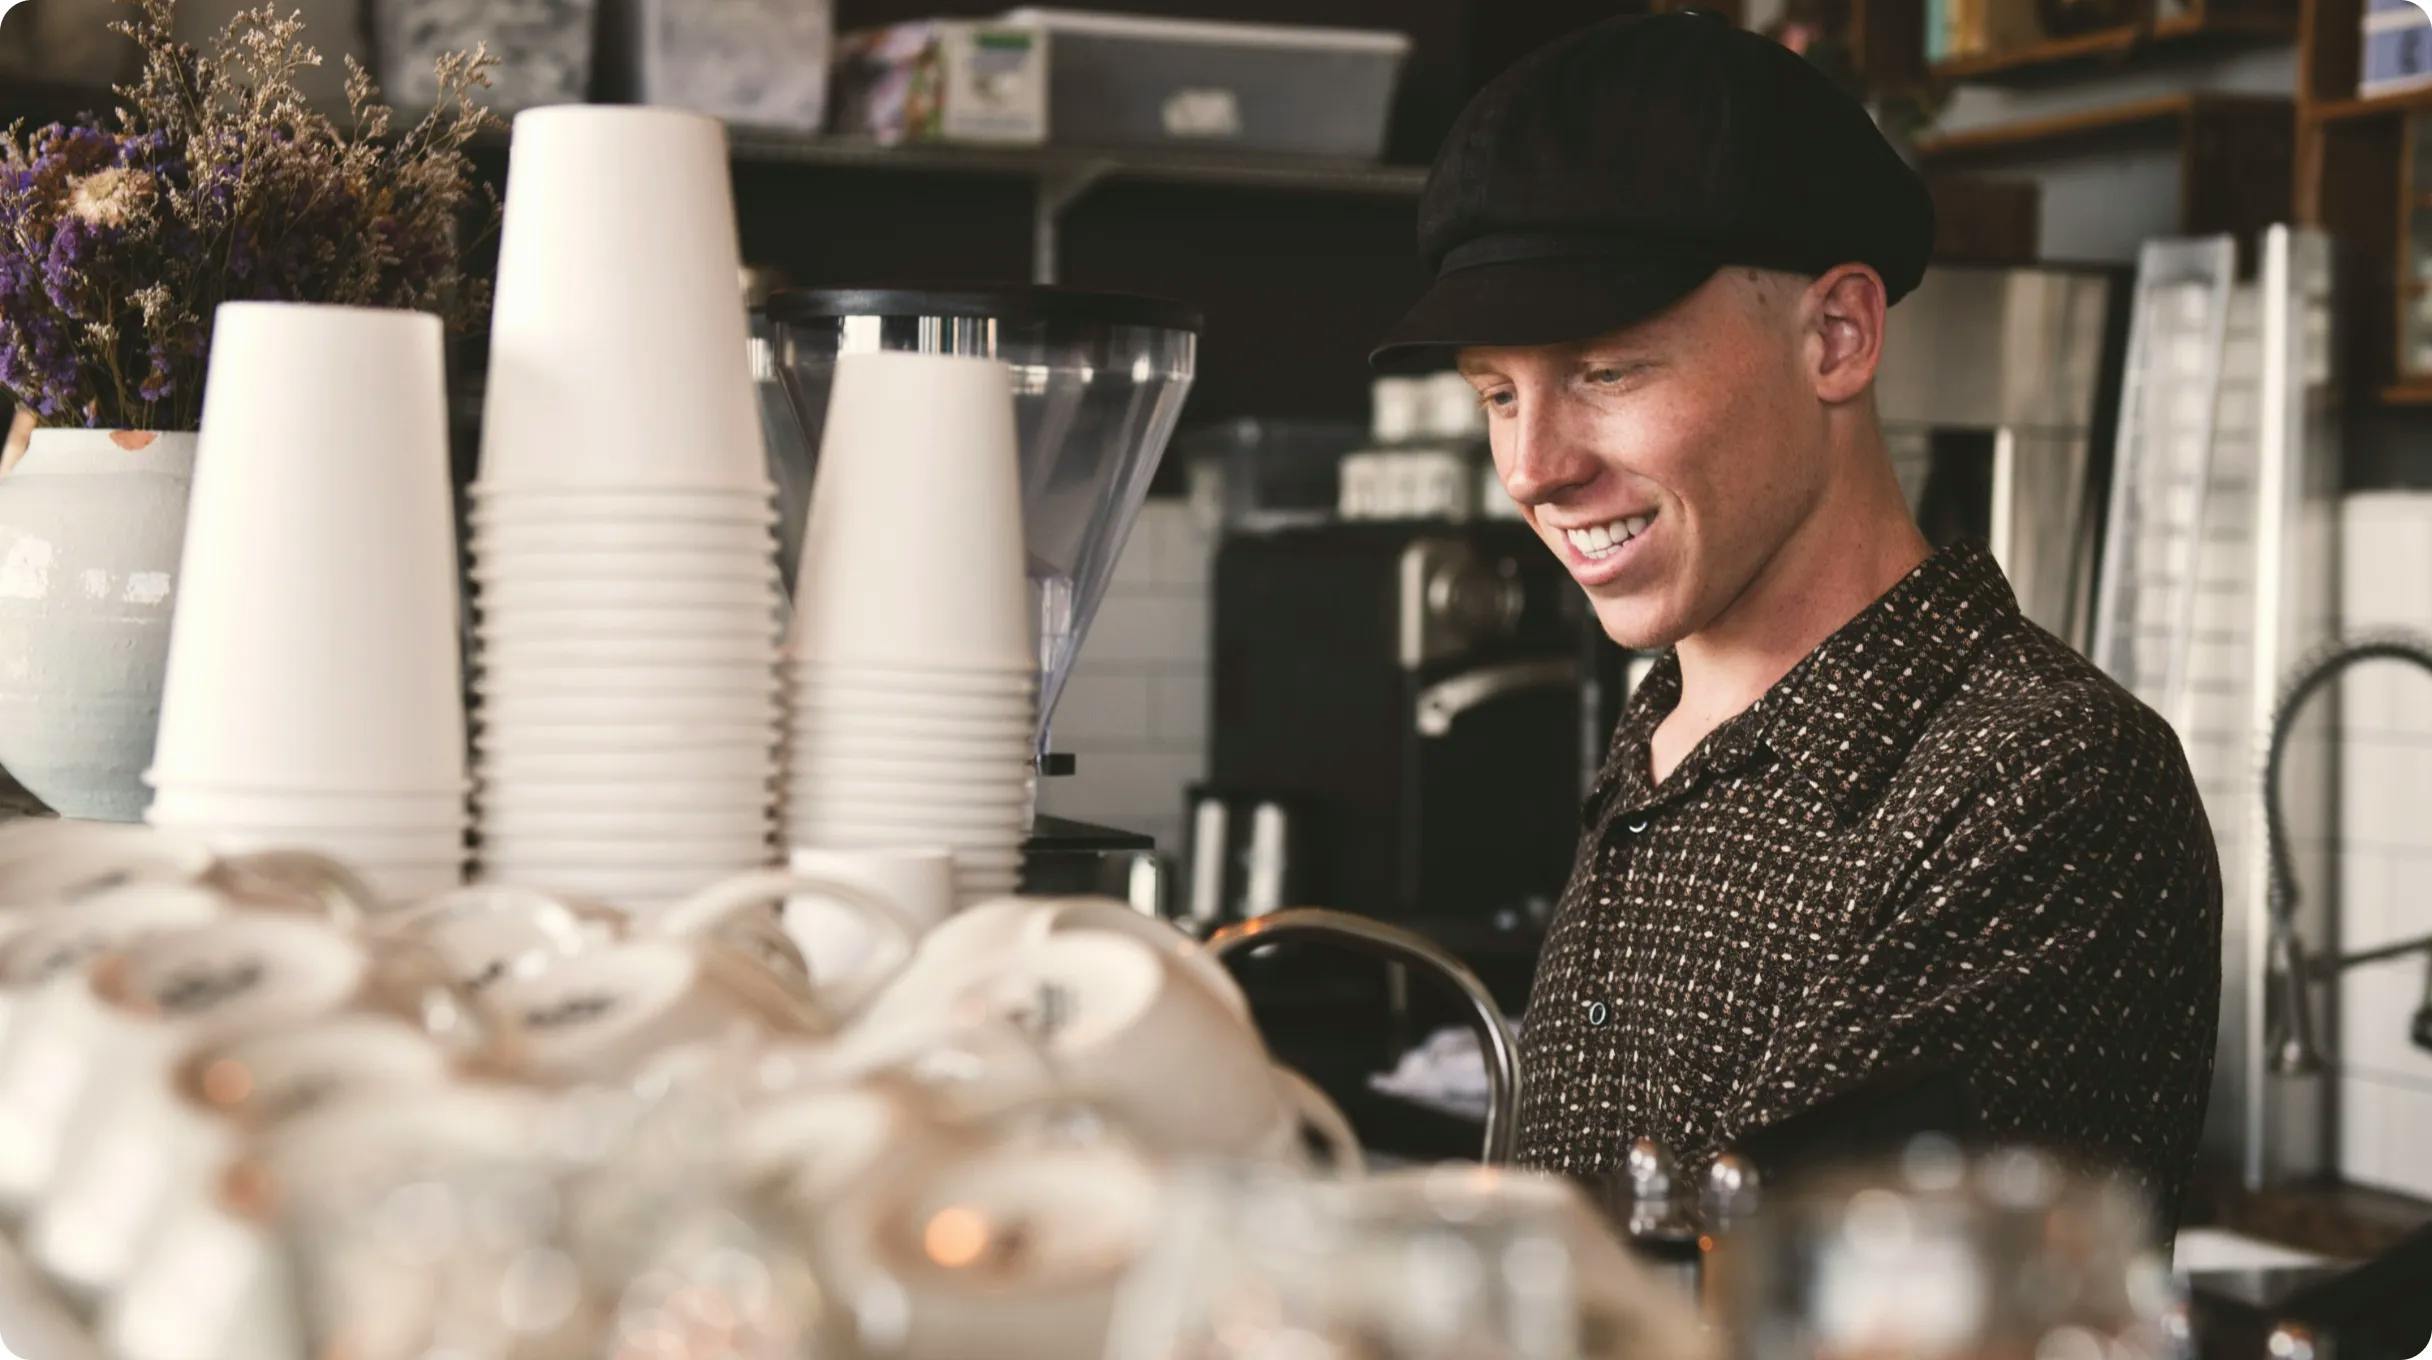 A man smiling doing his work at a coffee shop.